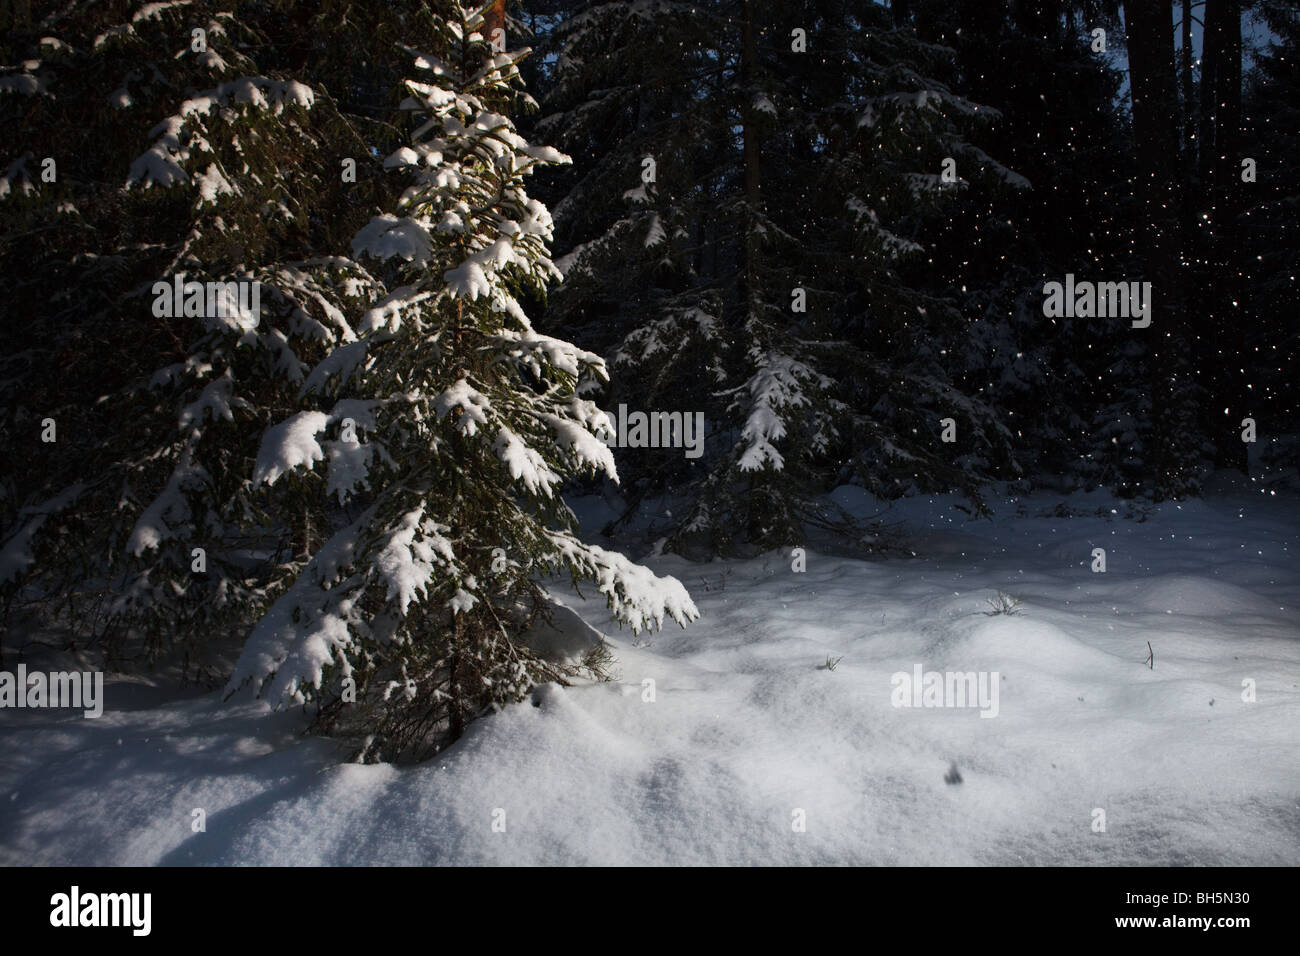 Winter Forest Night Scene Deep Snow And Snowing Stock Photo Alamy